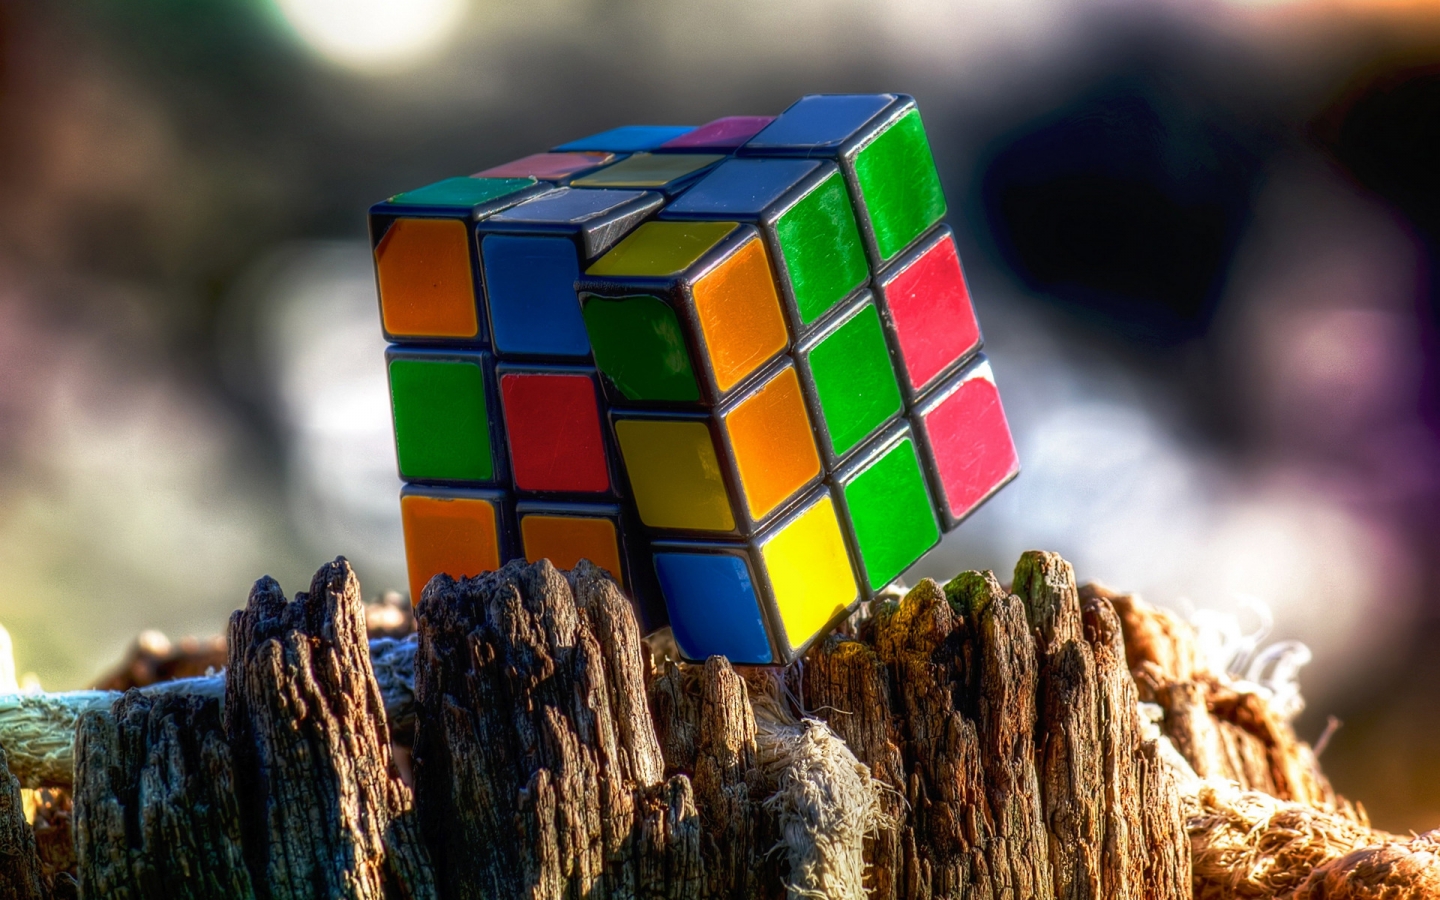 Rubiks Cube for 1440 x 900 widescreen resolution